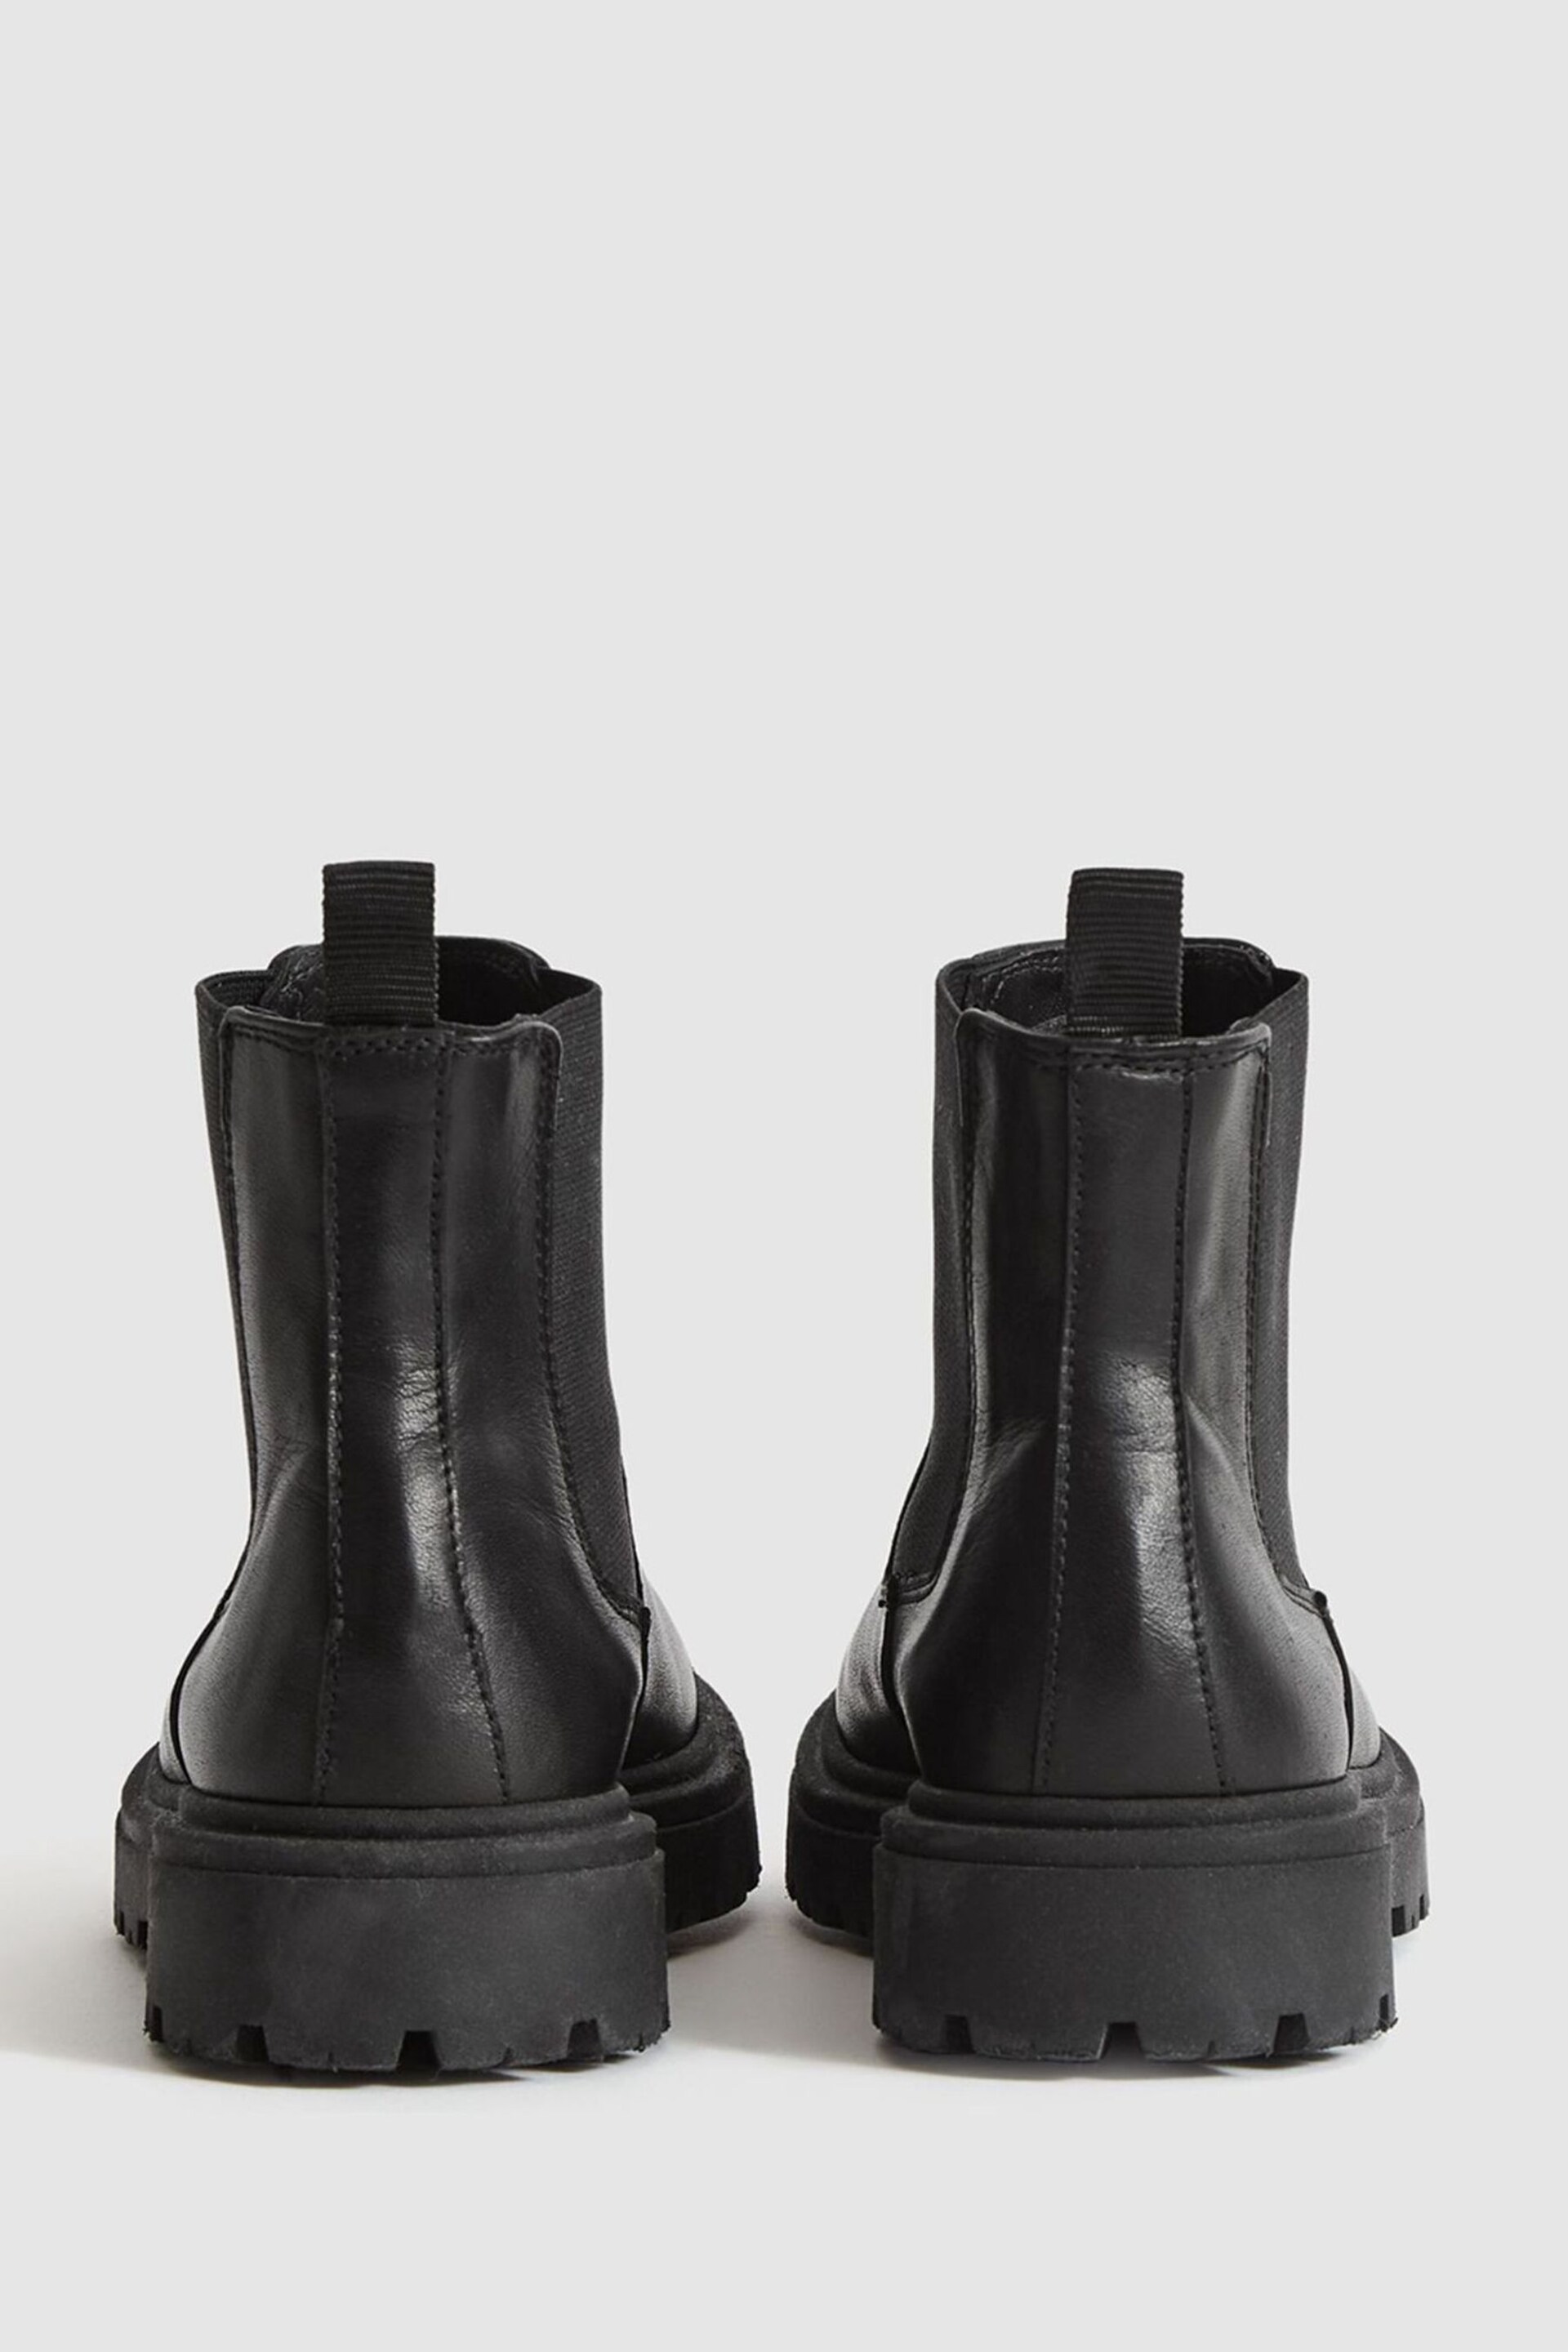 Reiss Black Taylor Junior Leather Chelsea Boots - Image 6 of 7